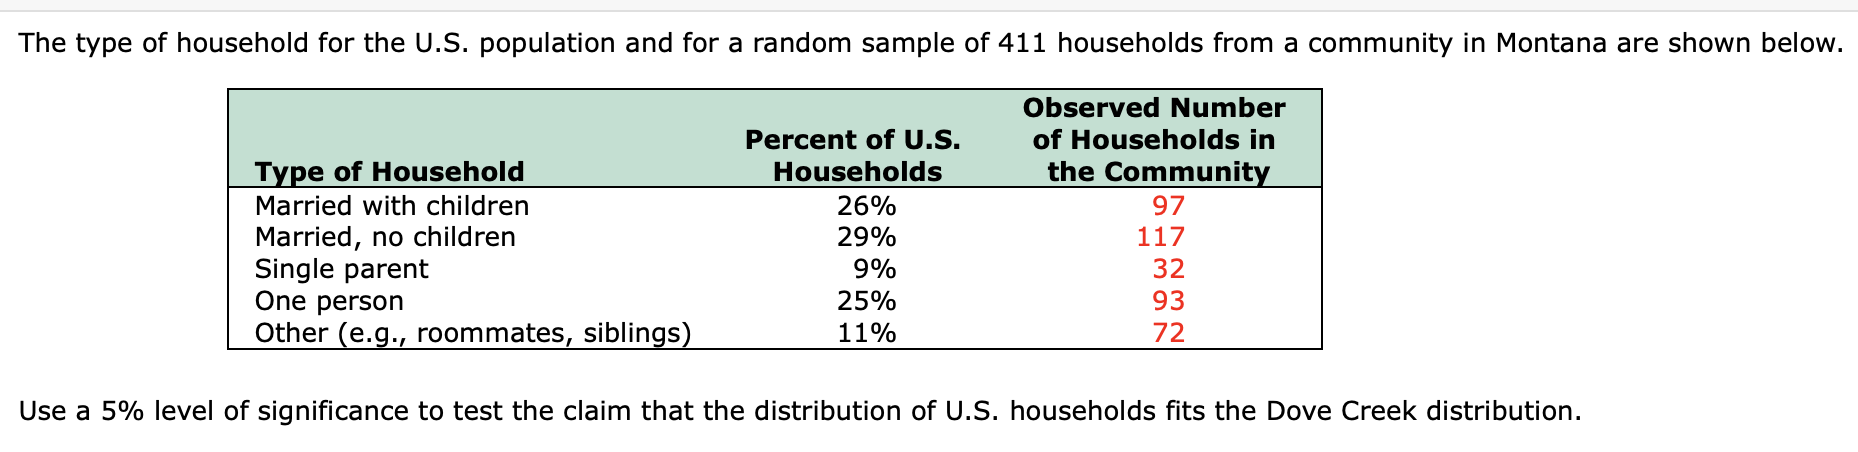 The type of household for the U.S. population and for a random sample of 411 households from a community in Montana are shown below.
Observed Number
Percent of U.S.
Type of Household
of Households in
the Community
Households
26%
29%
Married with children
Married, no children
Single parent
One person
Other (e.g., roommates, siblings)
97
117
9%
32
25%
93
11%
72
Use a 5% level of significance to test the claim that the distribution of U.S. households fits the Dove Creek distribution.
